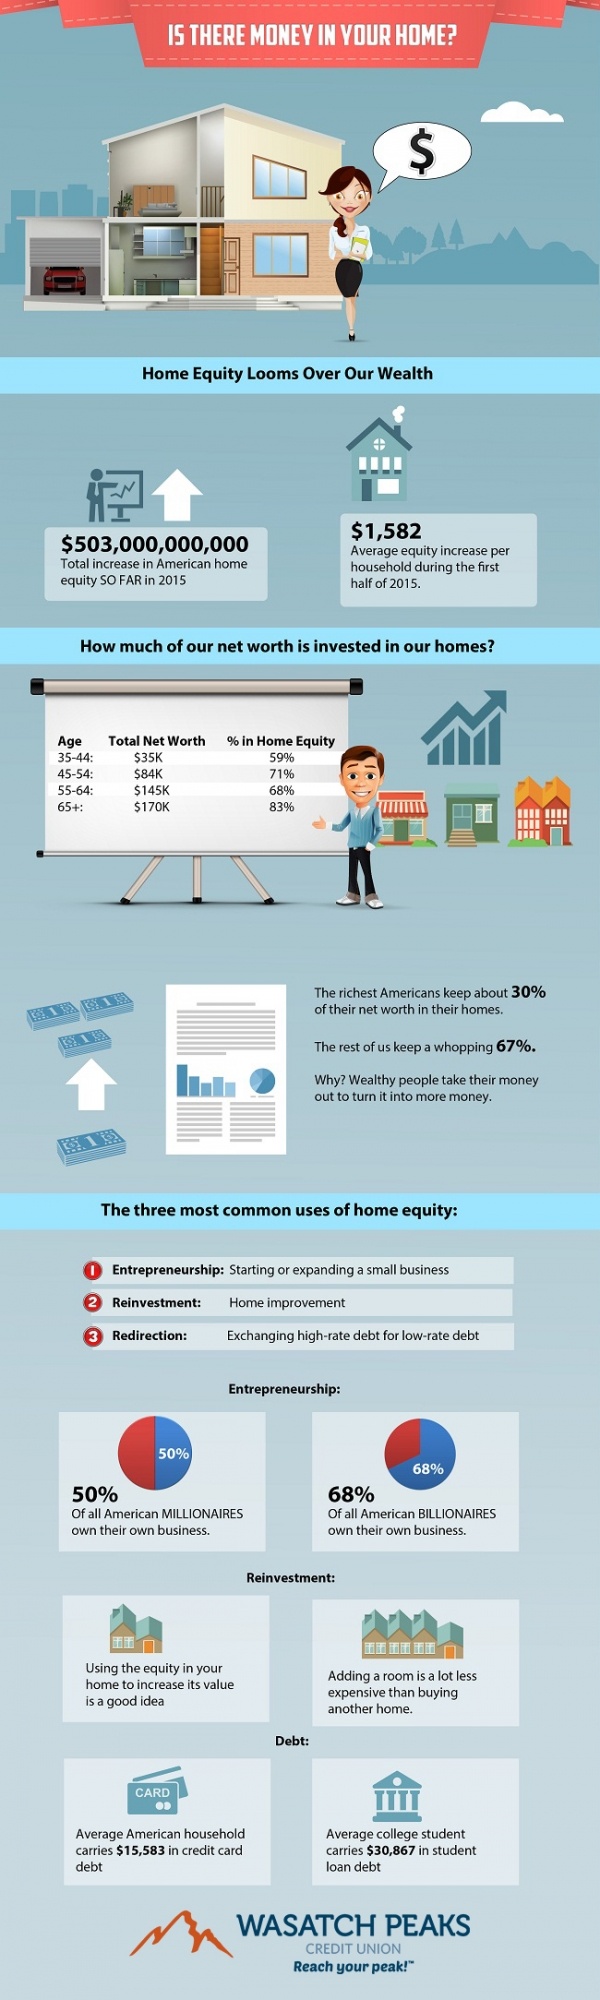 INFOGRAPHIC- Is there money in your home?.jpg